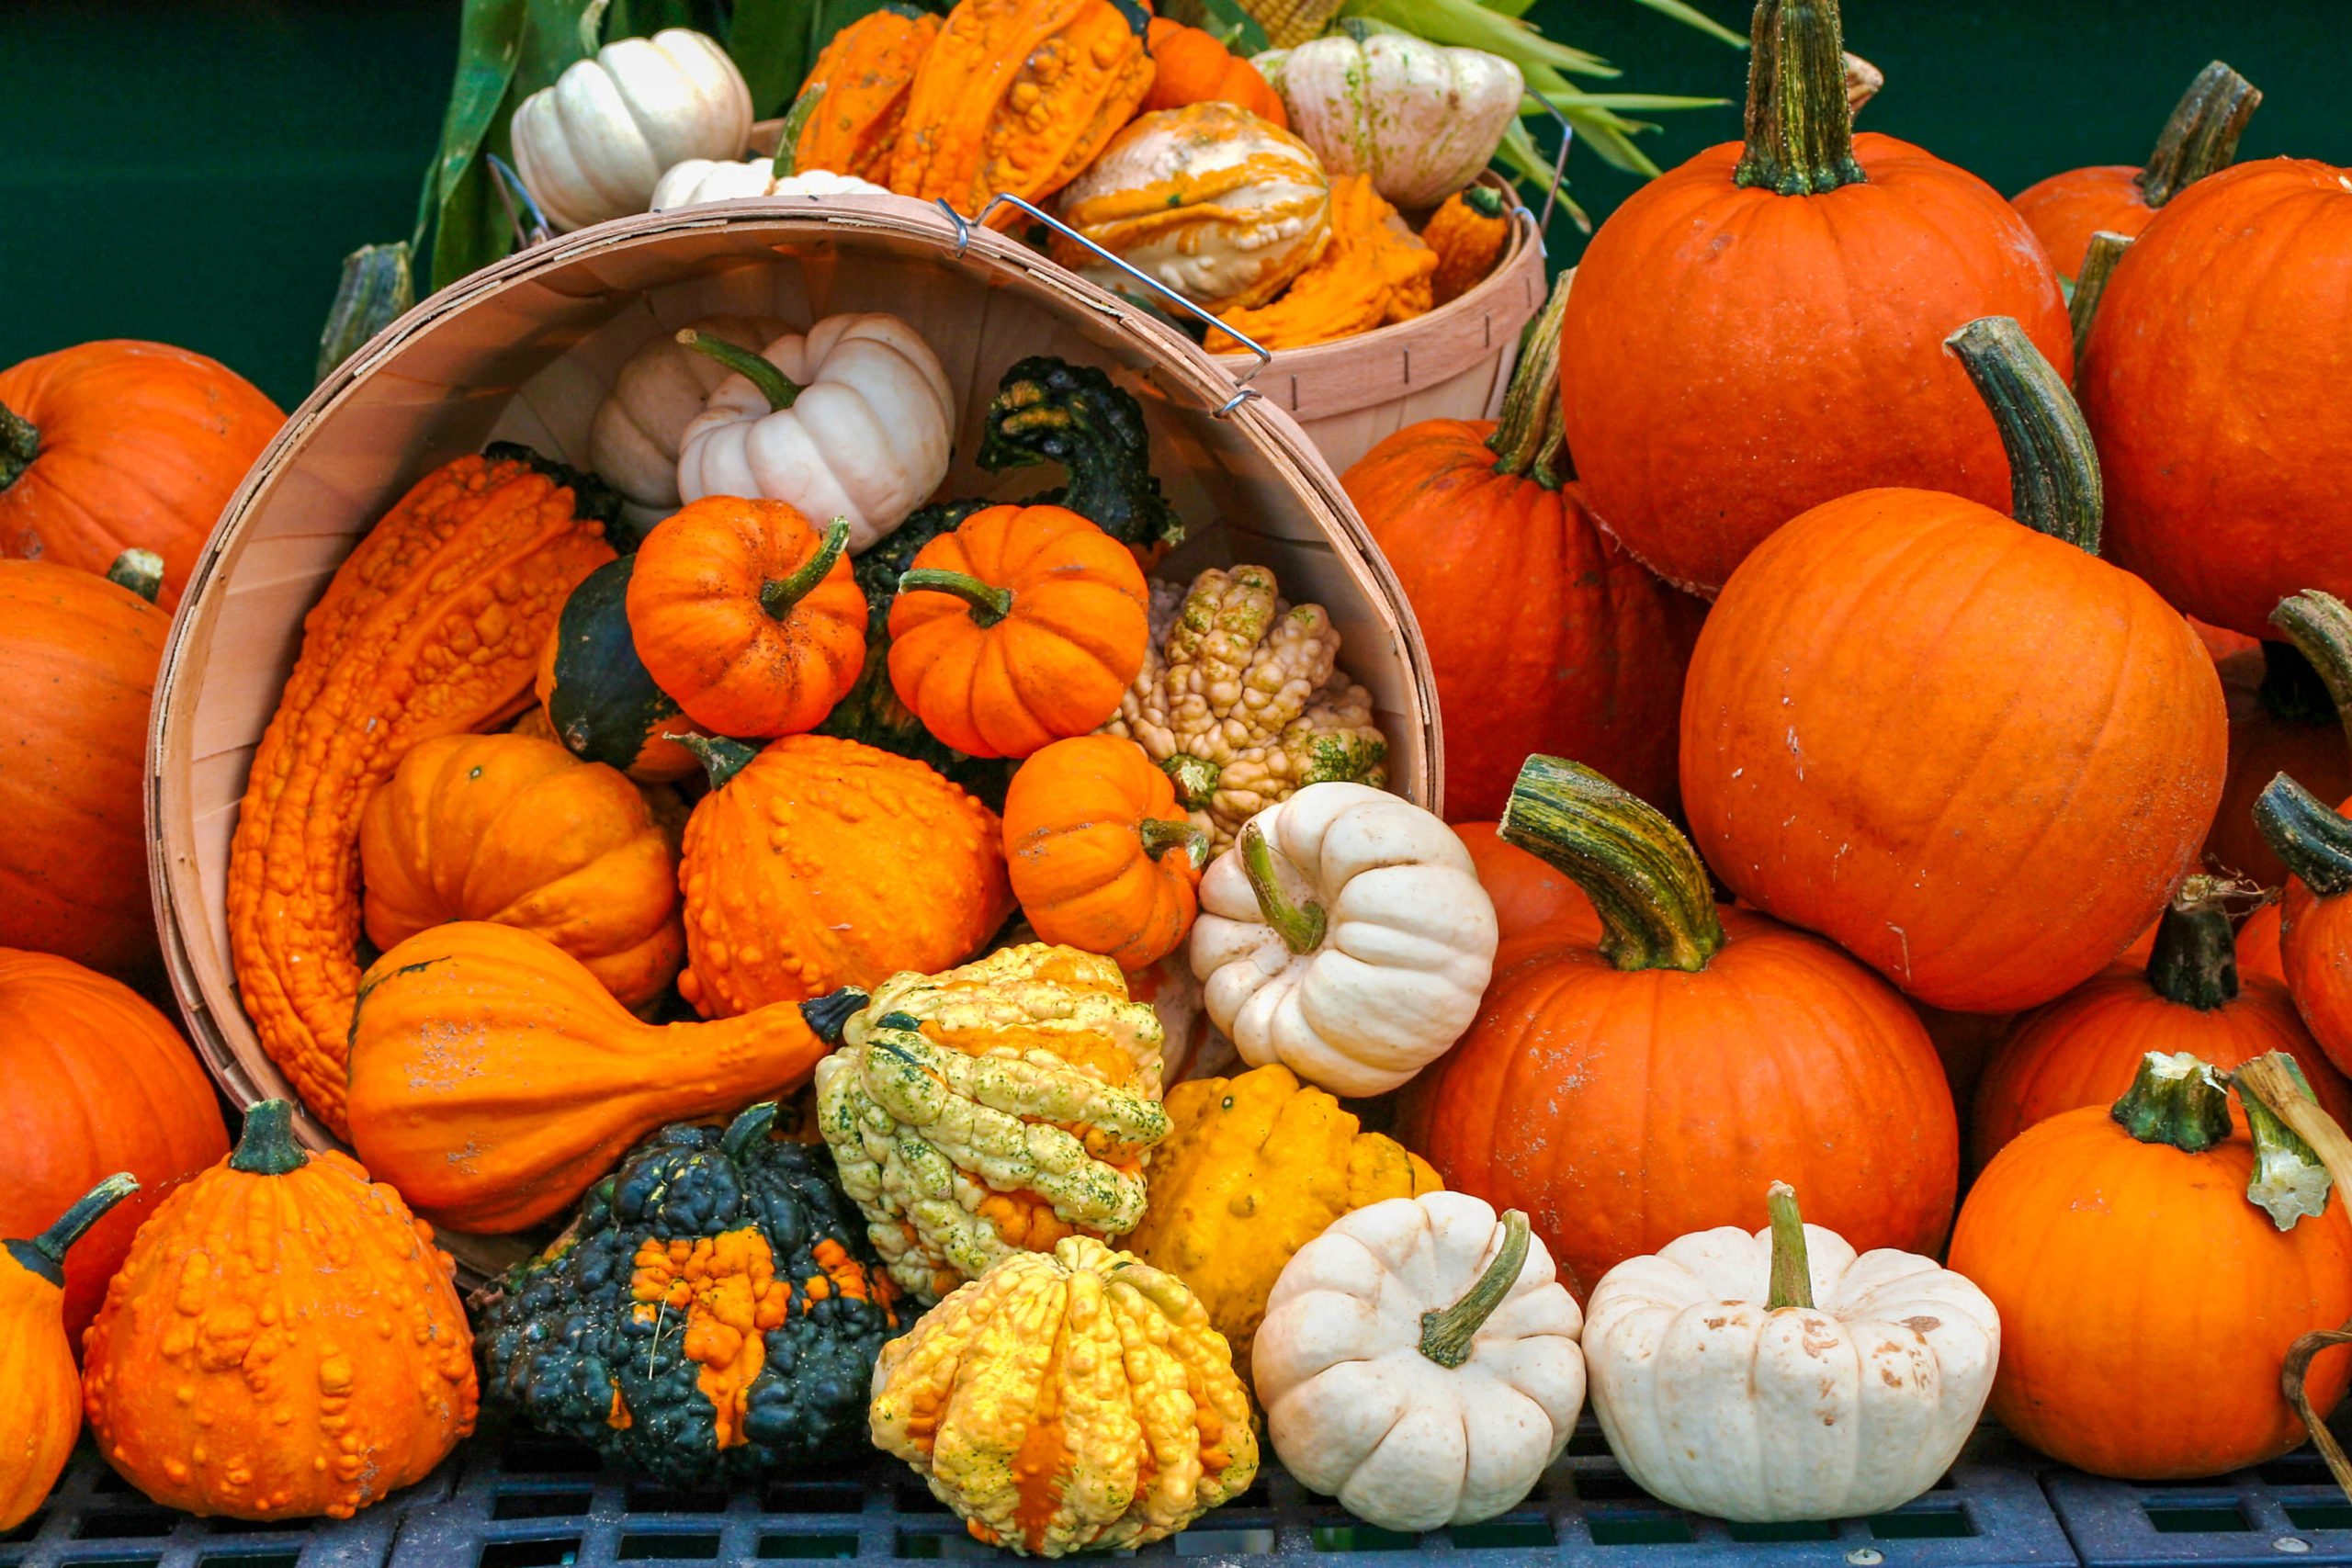 Gourds, squashes and pumpkins, oh my! As colorful as the costumes children wear for trick-or-treating may be, nature's beauty is unsurpassed this time of year, and the scores of pumpkins, gourds and squashes on display only add to that colorful melange.